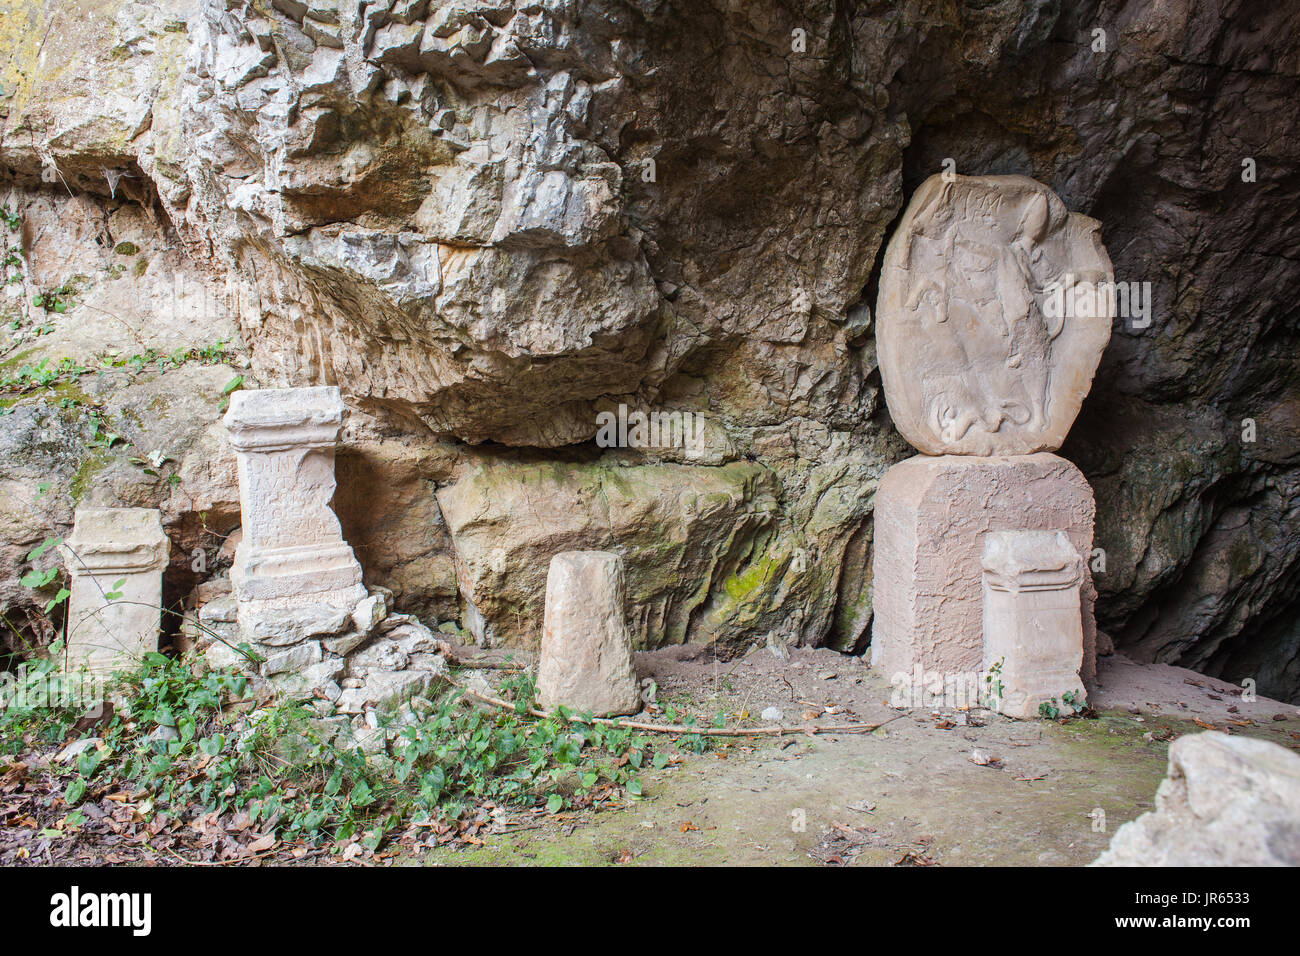 The Duino Mithraeum in the province of Trieste. Mithraea were places of worship for the followers of the Roman mystery religion known as the Mithraic  Stock Photo